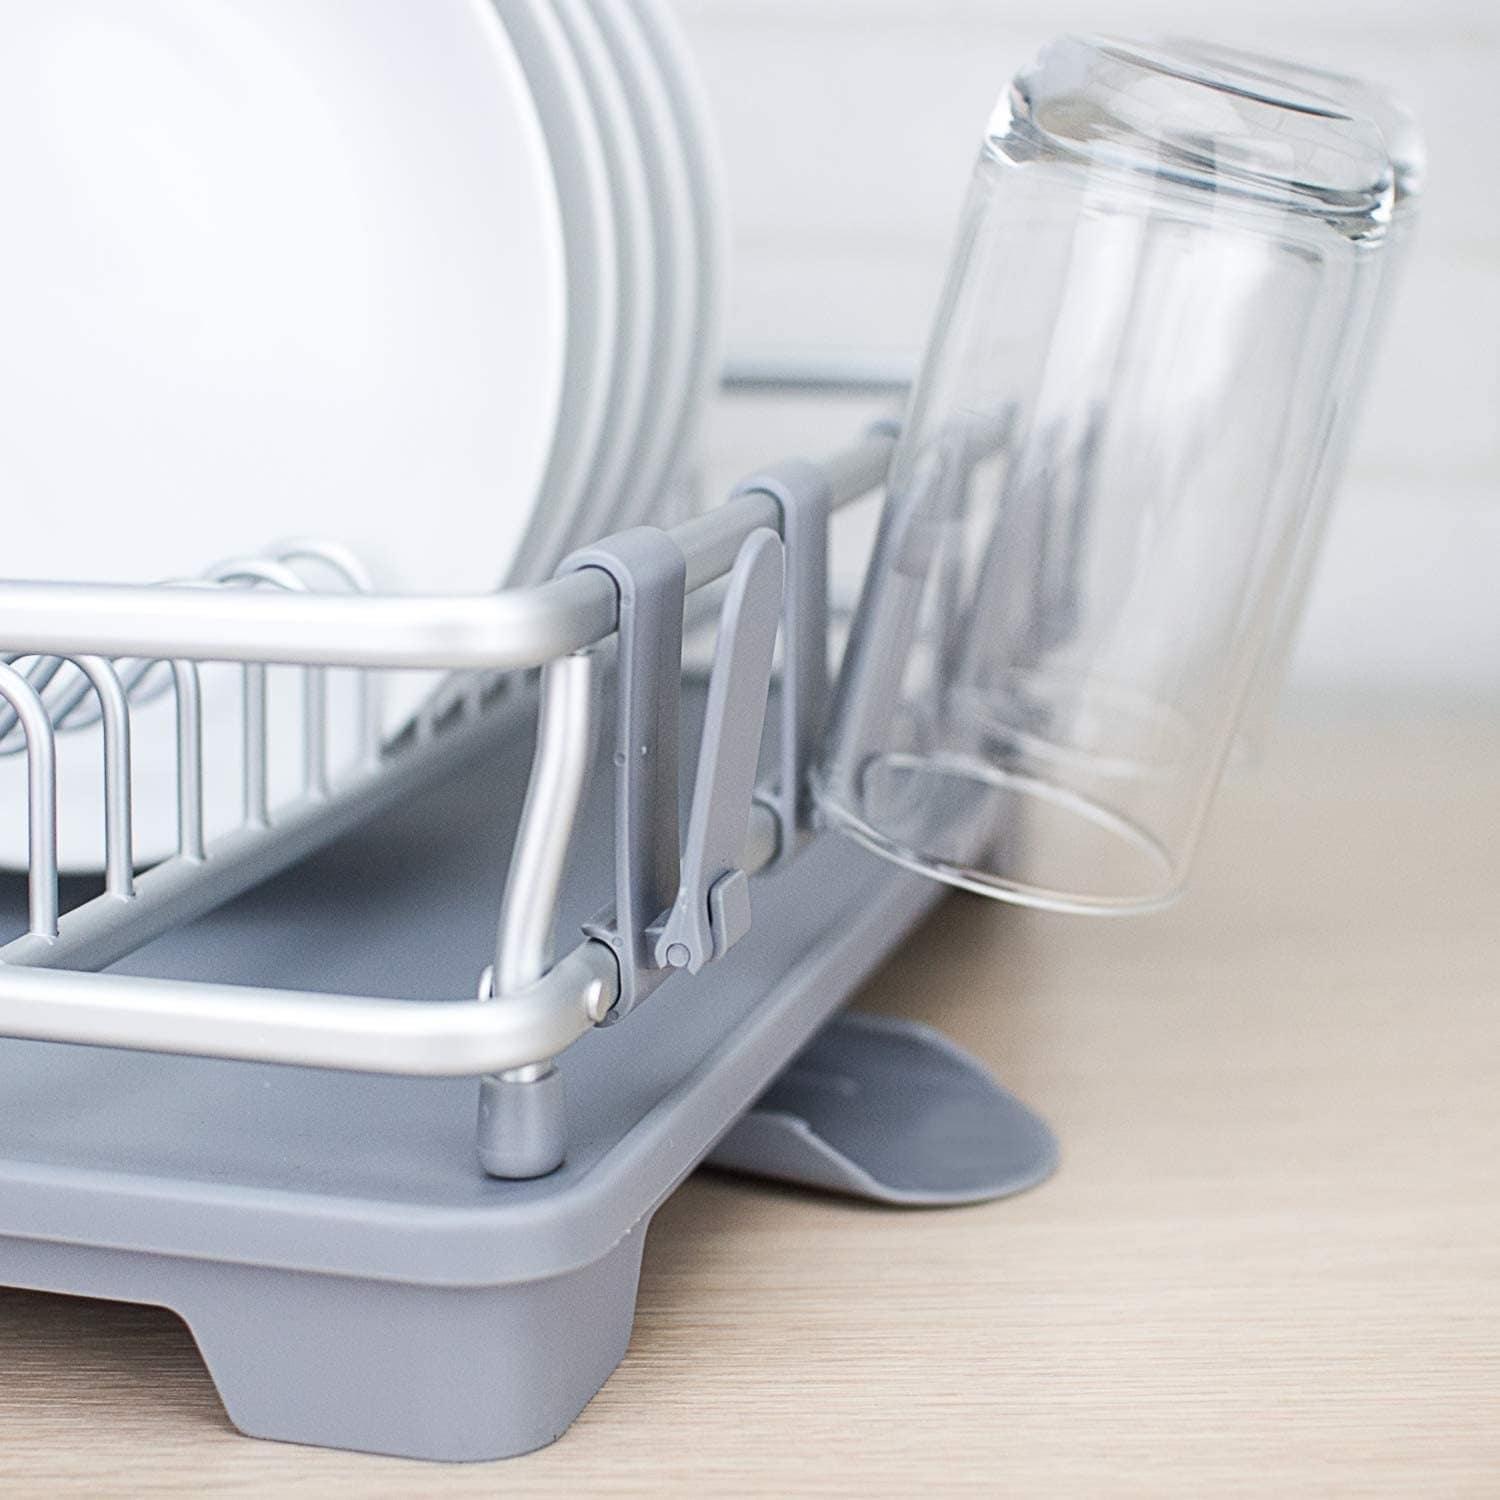 https://ak1.ostkcdn.com/images/products/is/images/direct/a26d0df46b6443783ca4bf860cacfacce61439cb/Daily-Boutik-Aluminum-Dish-Drying-Rack-With-Utensil-Holder.jpg